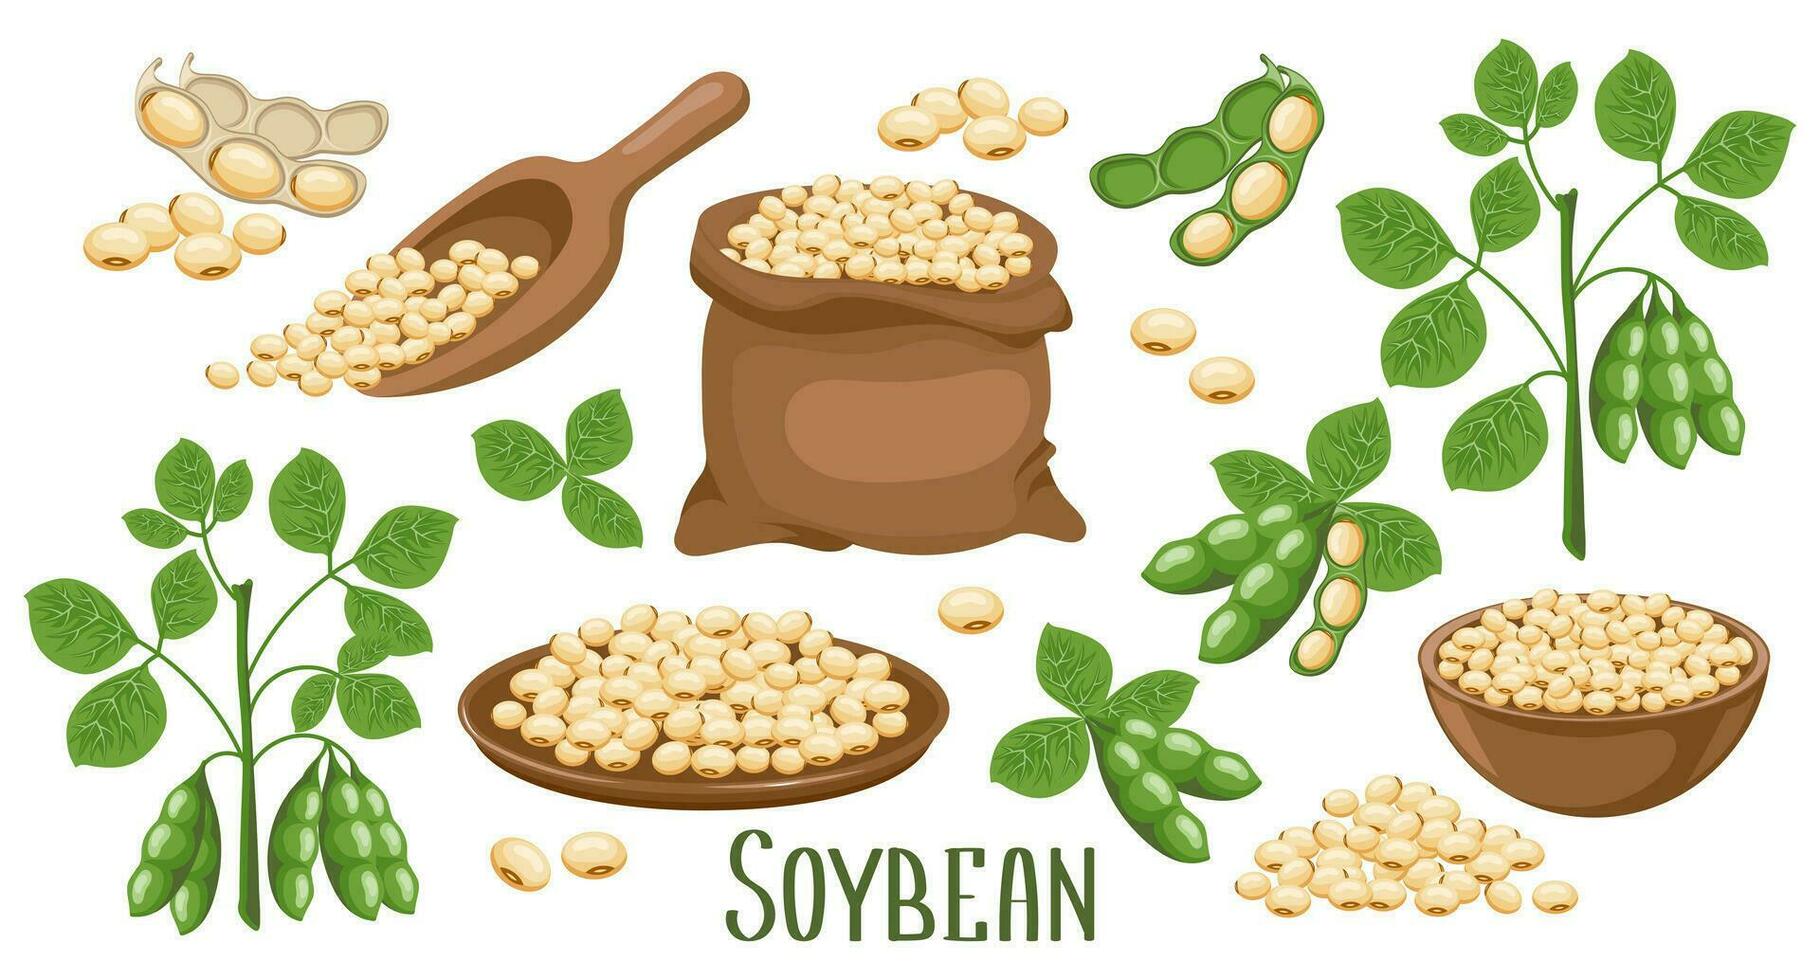 Set of soybeans. Soybean plant, soybeans in pods, in a canvas bag, bowl and wooden spoon. Food, agriculture. Illustration, vector